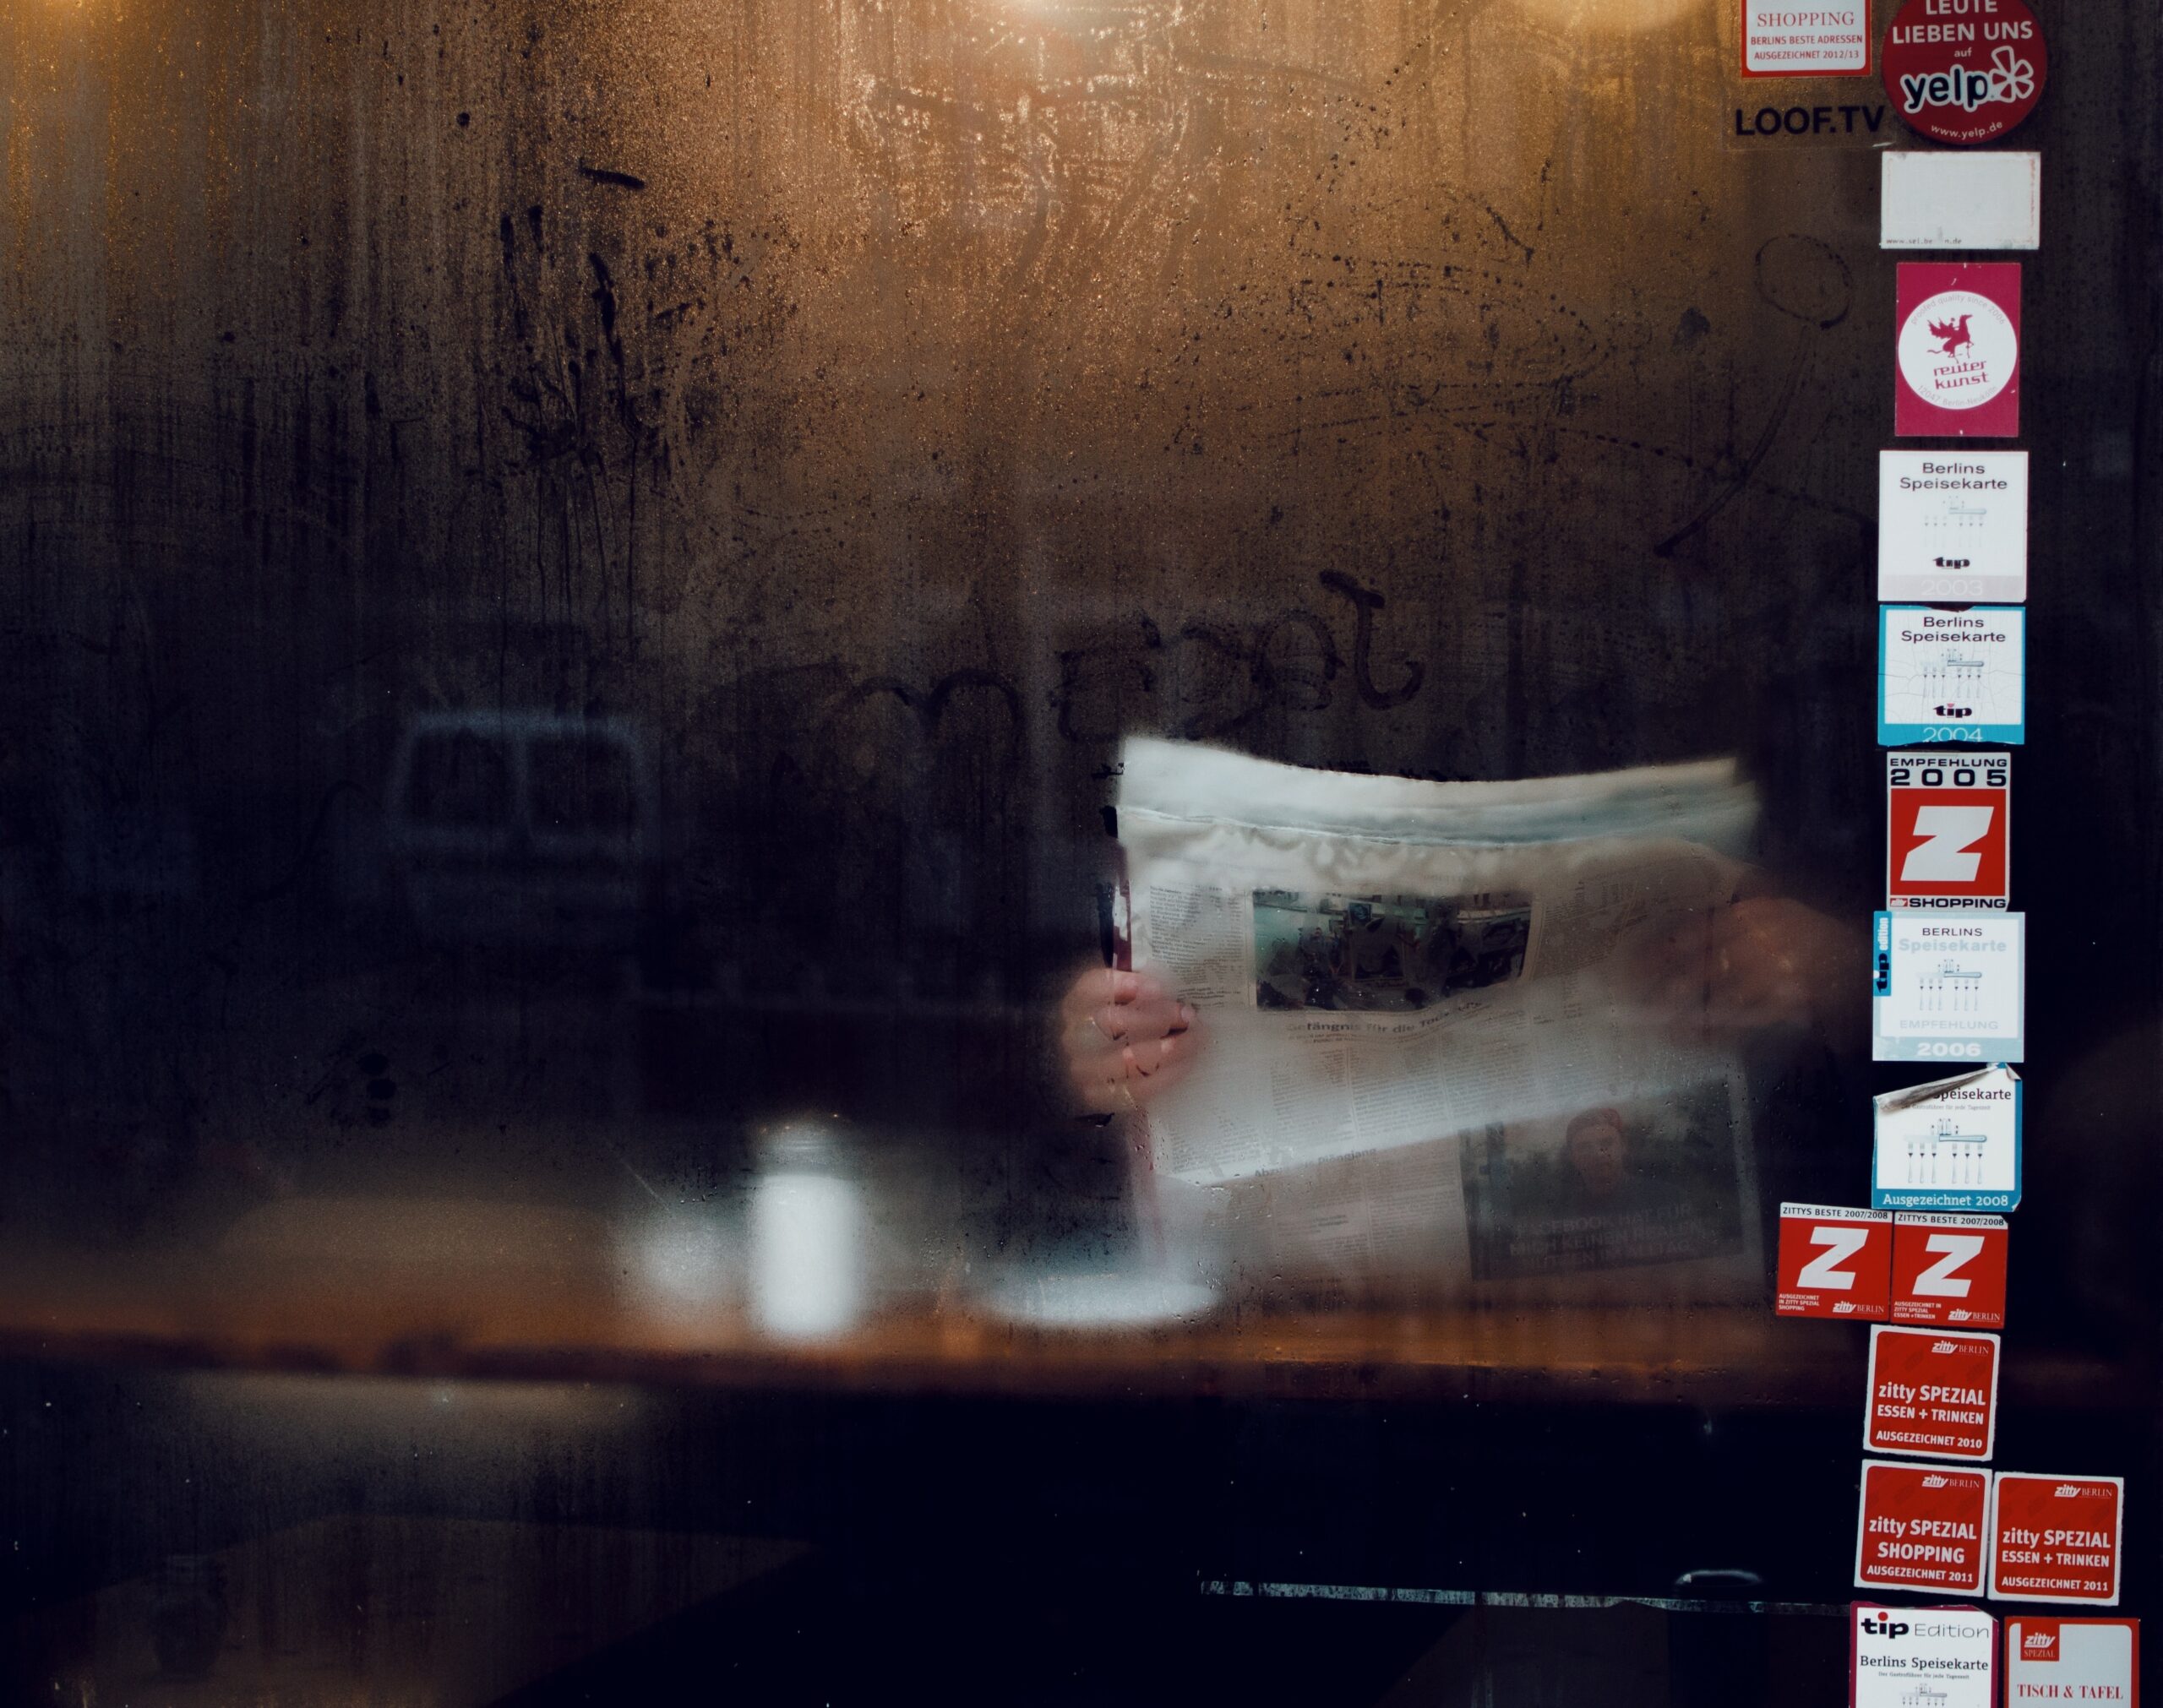 Person reading newspaper behind cafe window